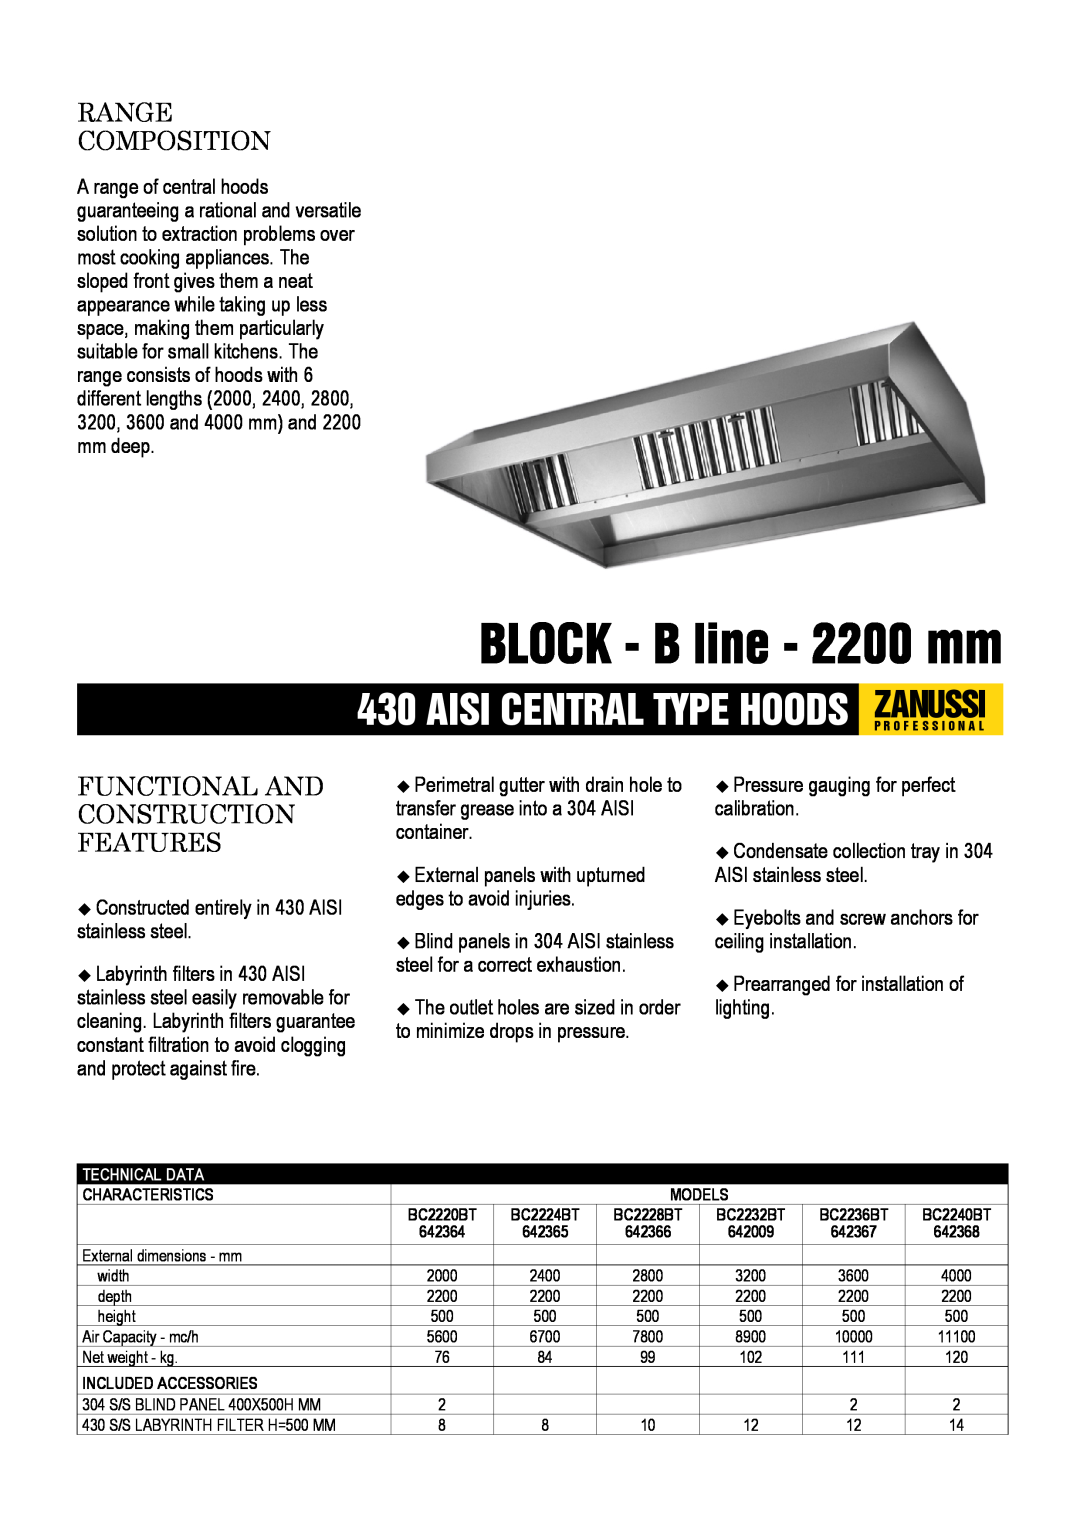 Zanussi 642365, BC2220BT dimensions BLOCK - B line - 2200 mm, Range Composition, Functional And Construction Features 